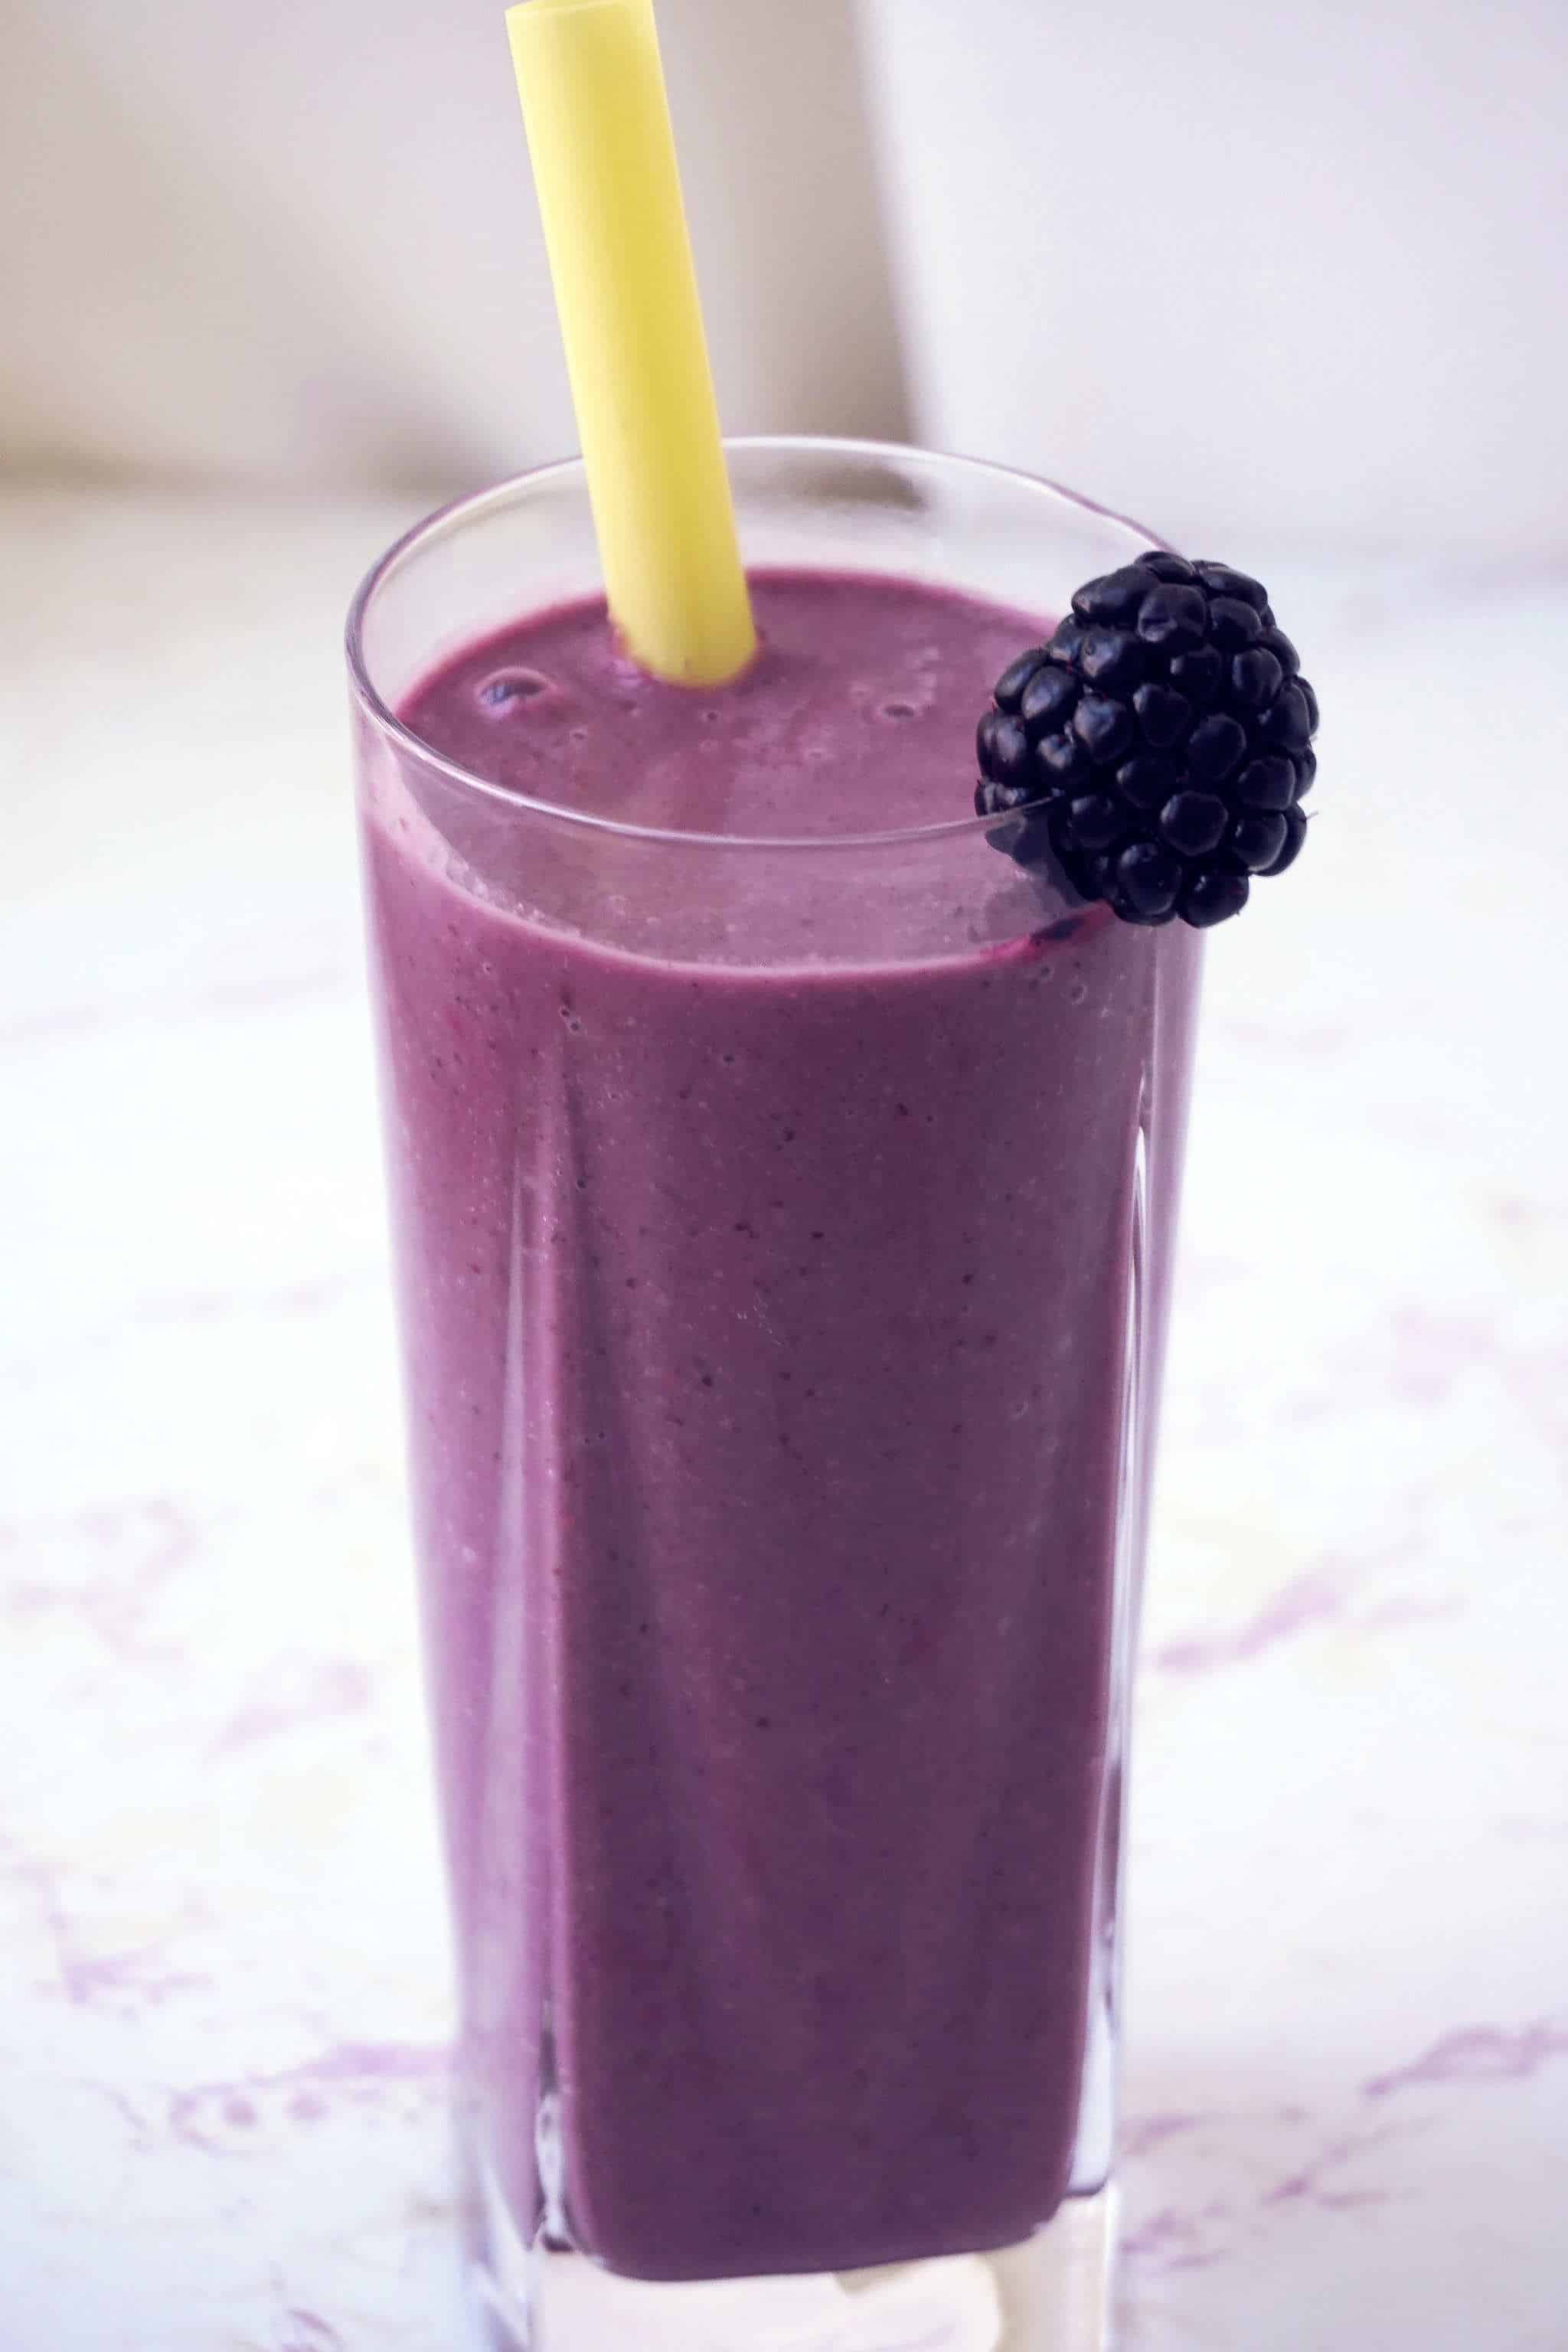 Mango Blackberry Smoothie - a healthy meal replacement smoothie recipe that includes healthy fats, protein and fiber.